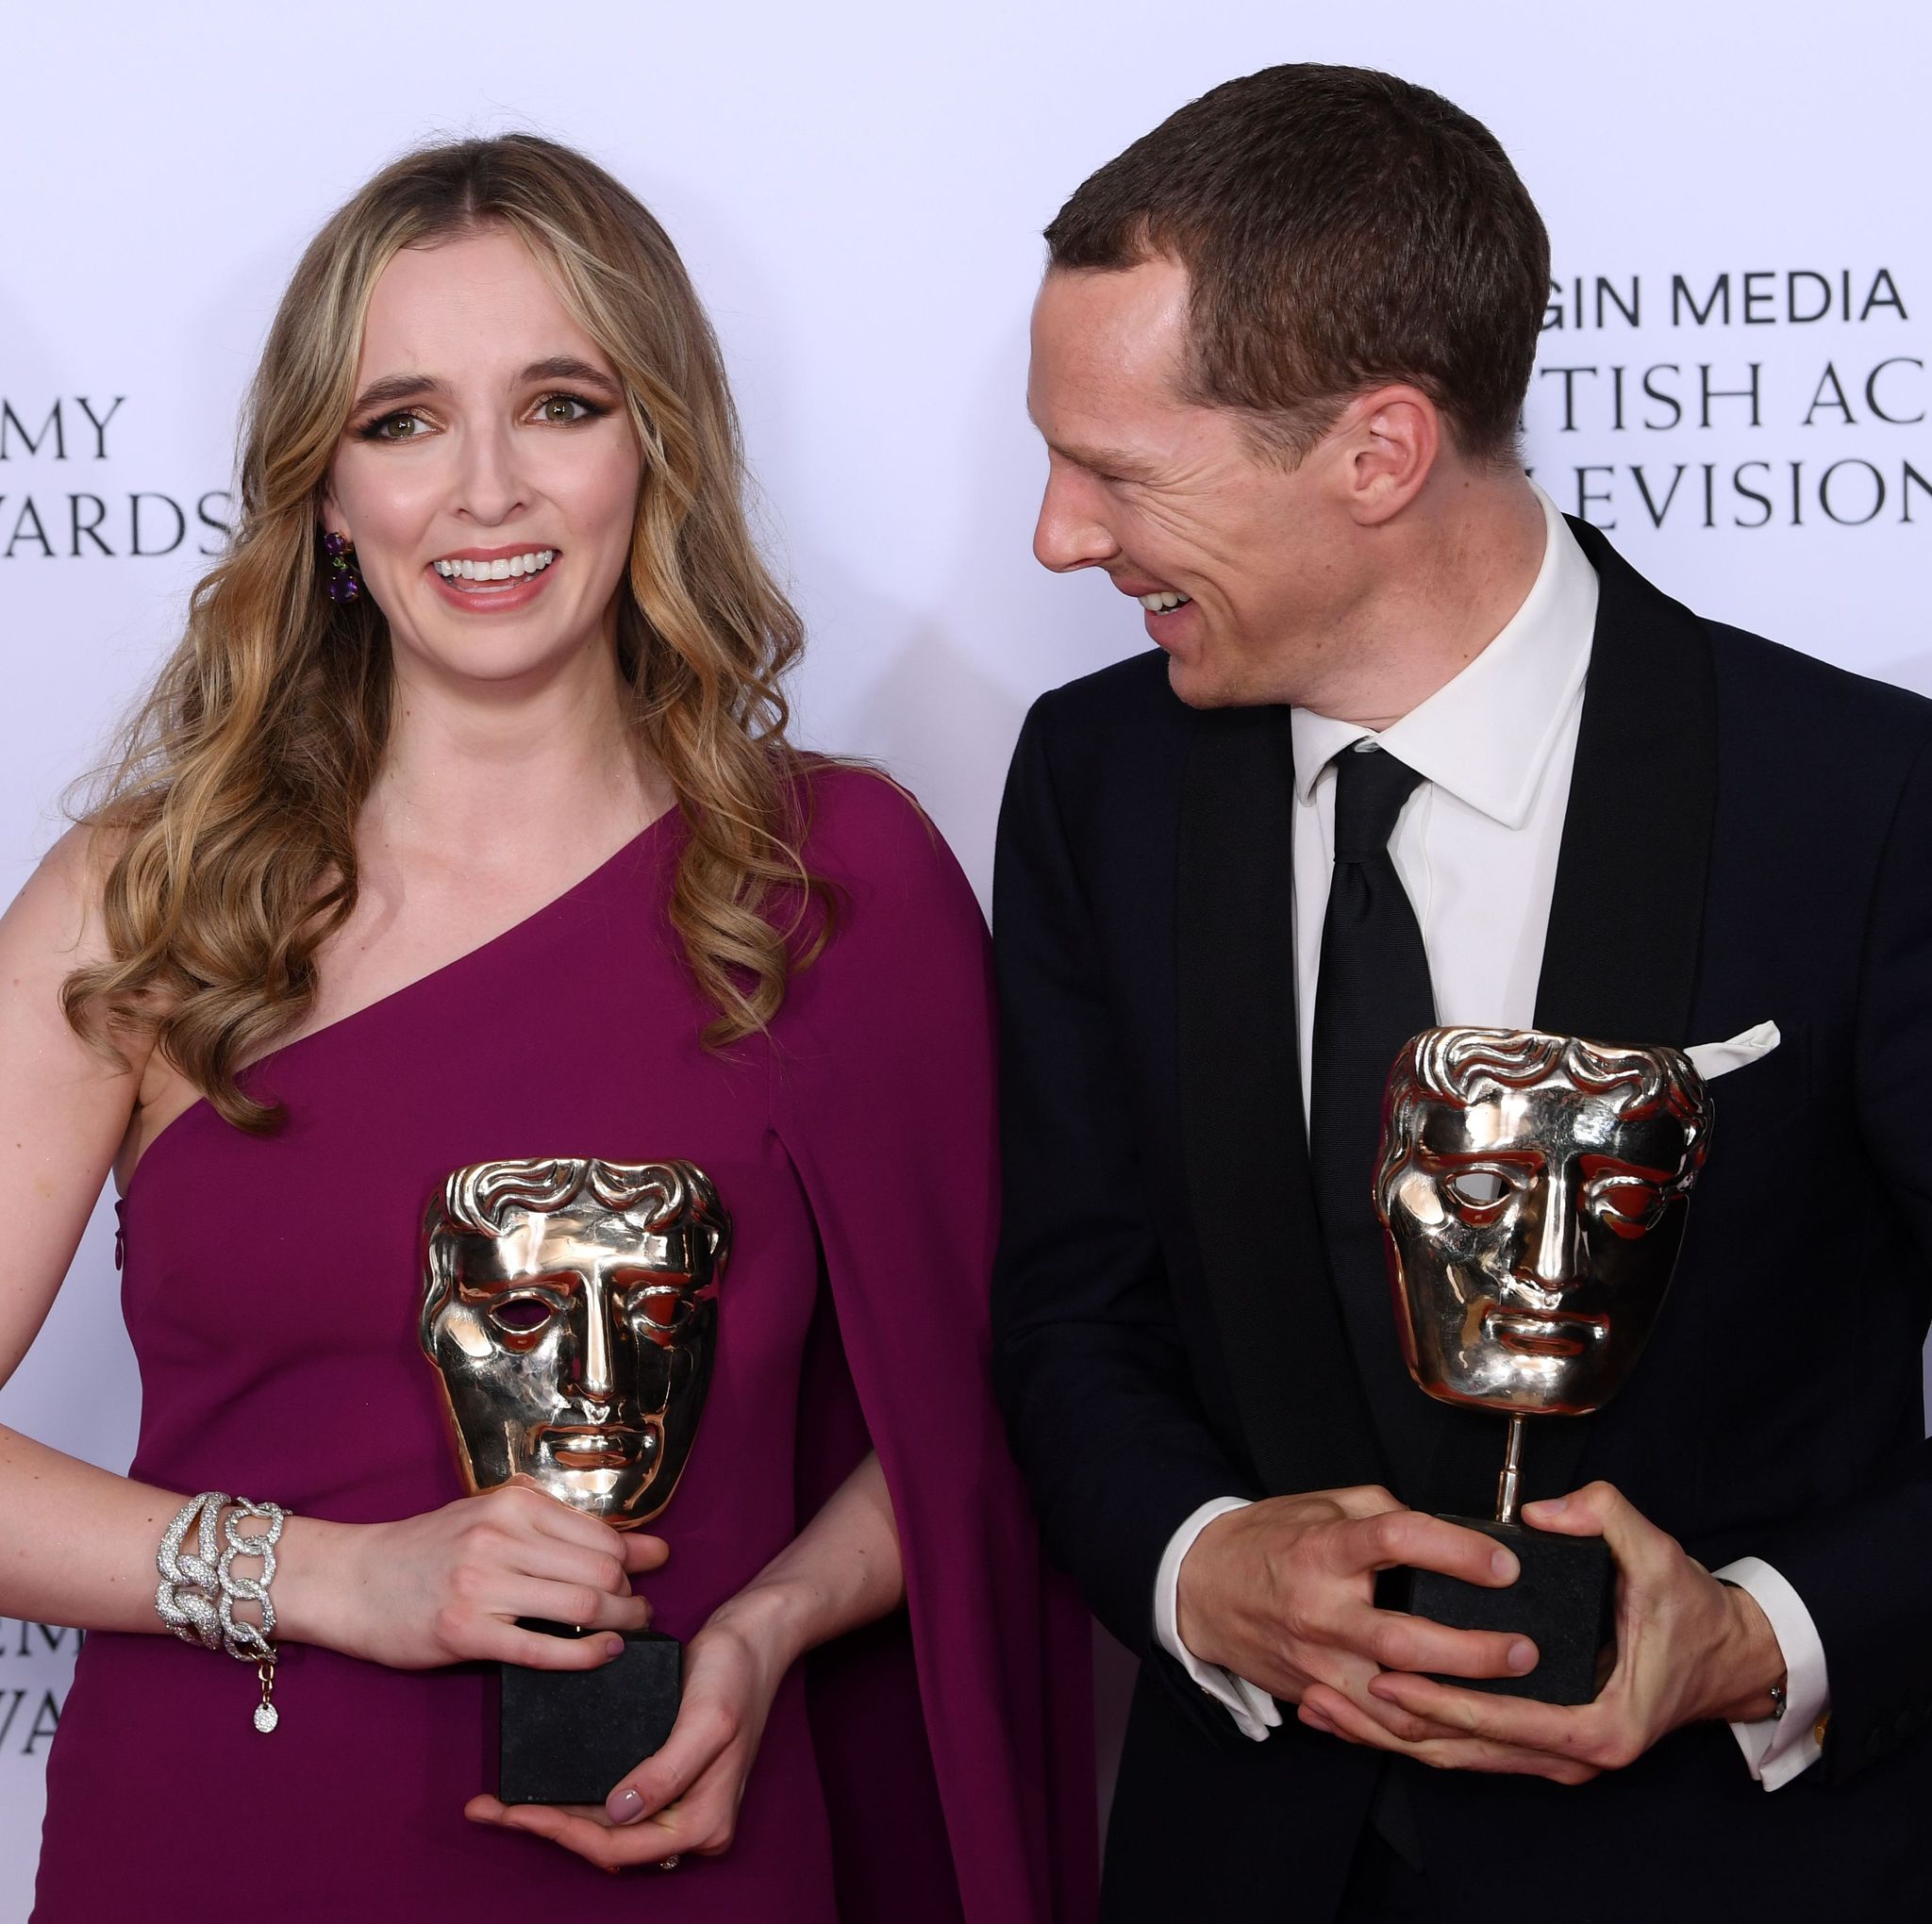 How to watch the BAFTA Games Awards 2019